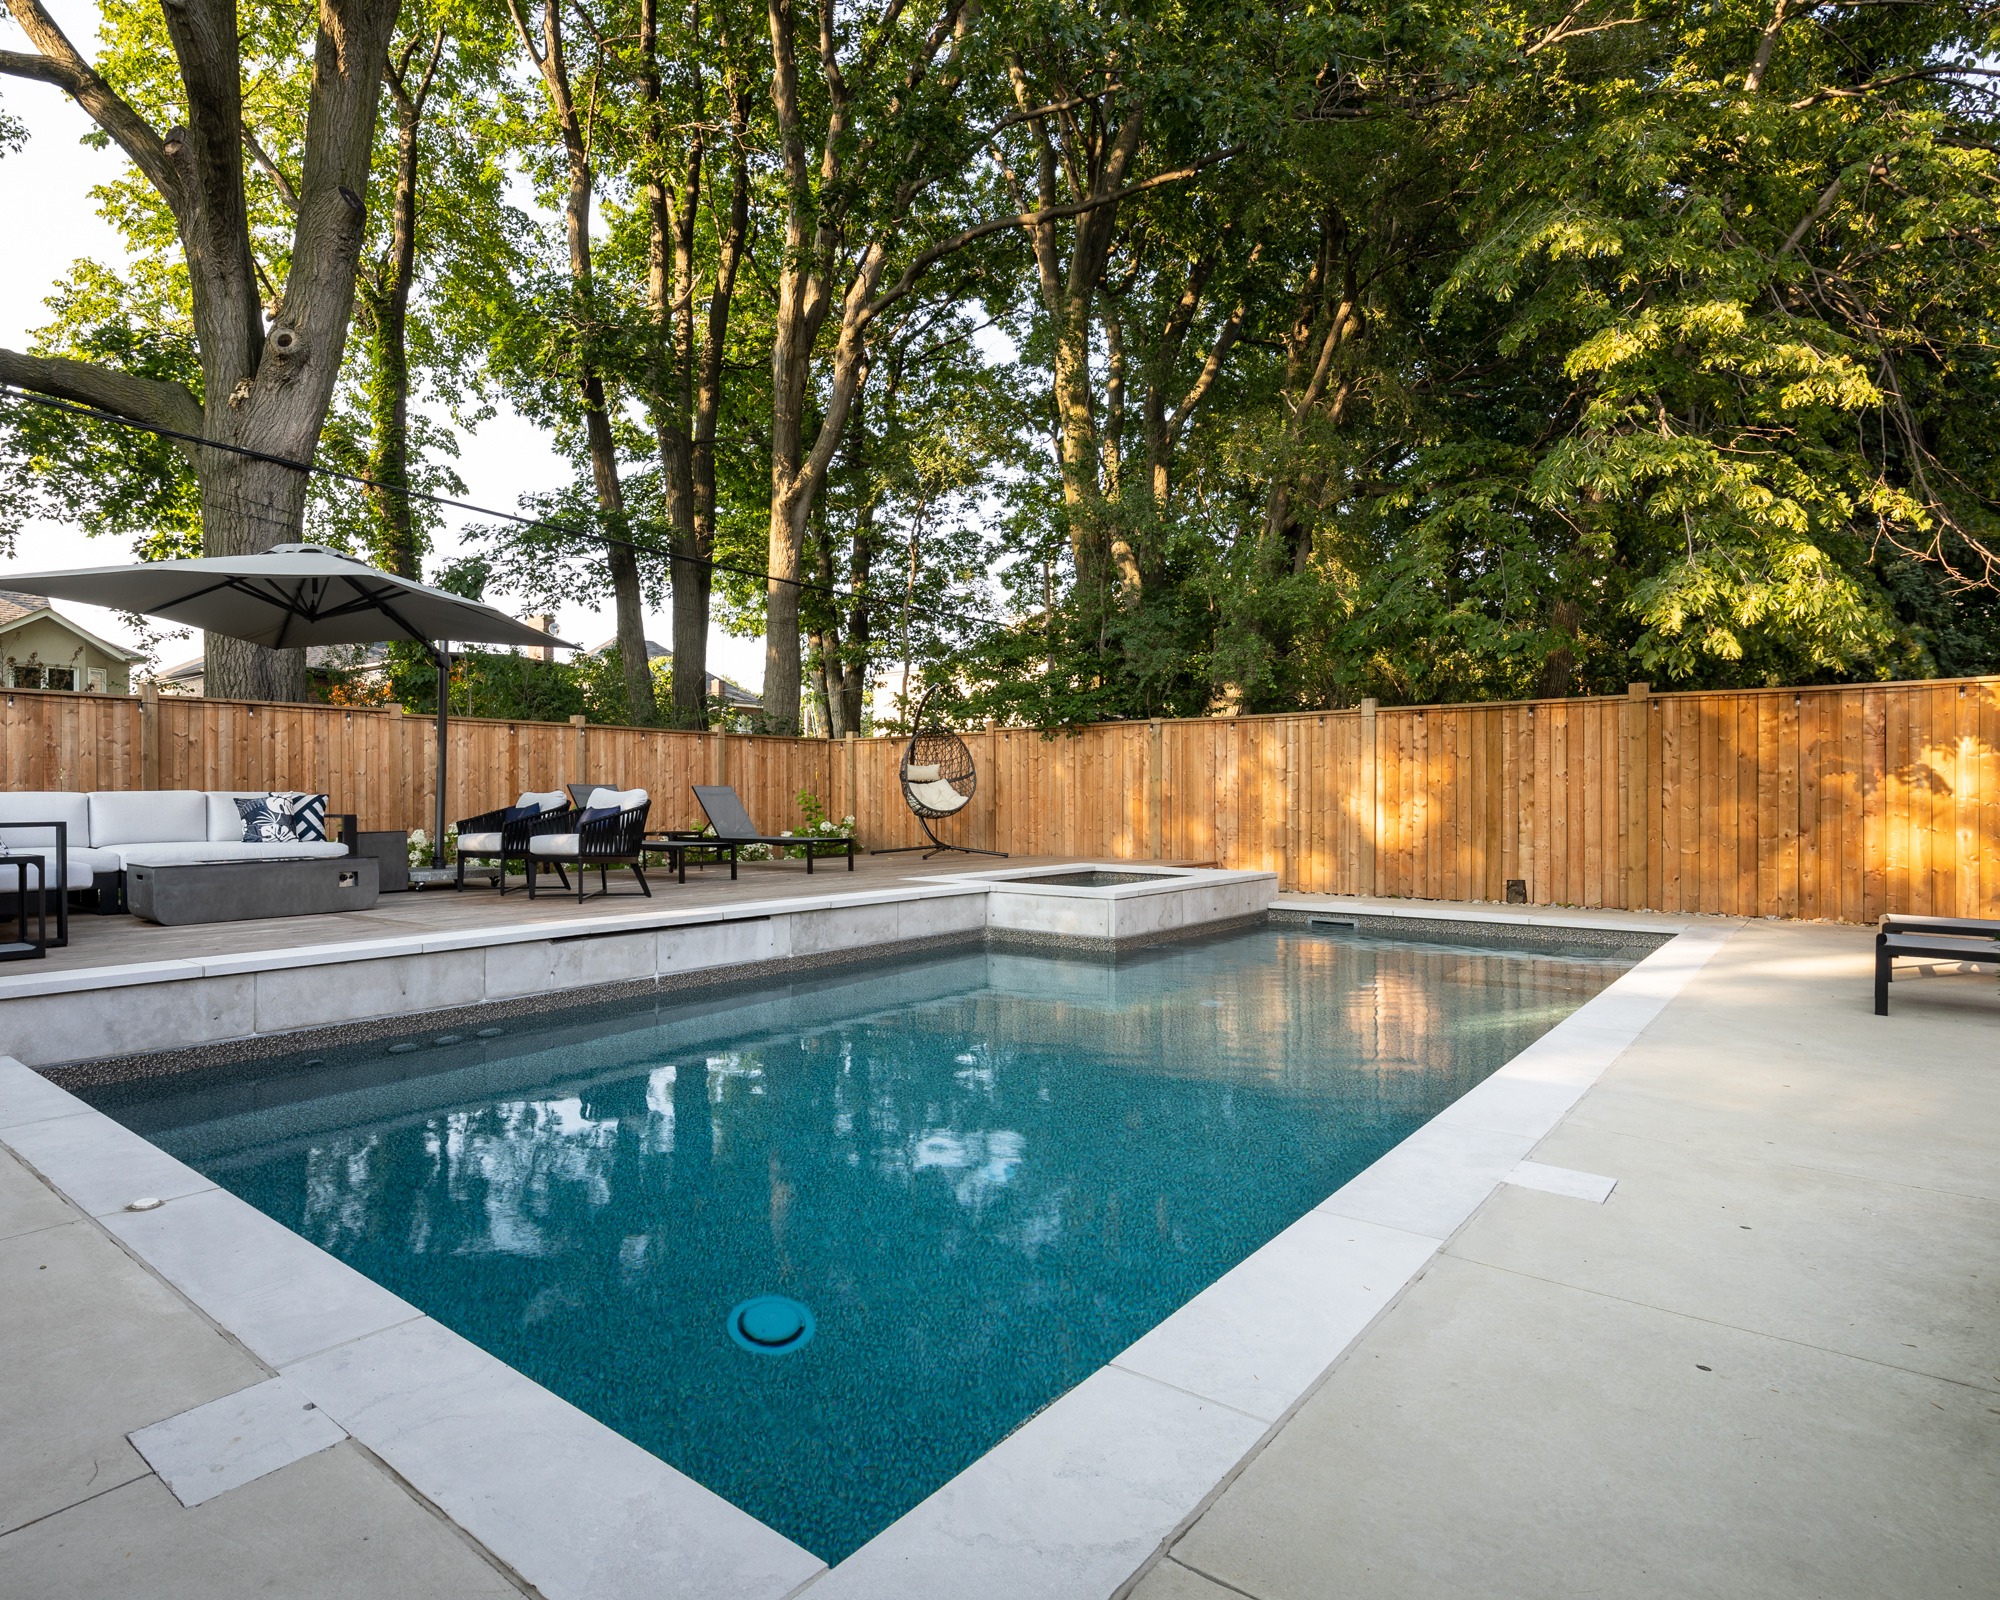 This image shows a tranquil backyard with a swimming pool, modern patio furniture, trees, and a wooden fence illuminated by warm sunlight.